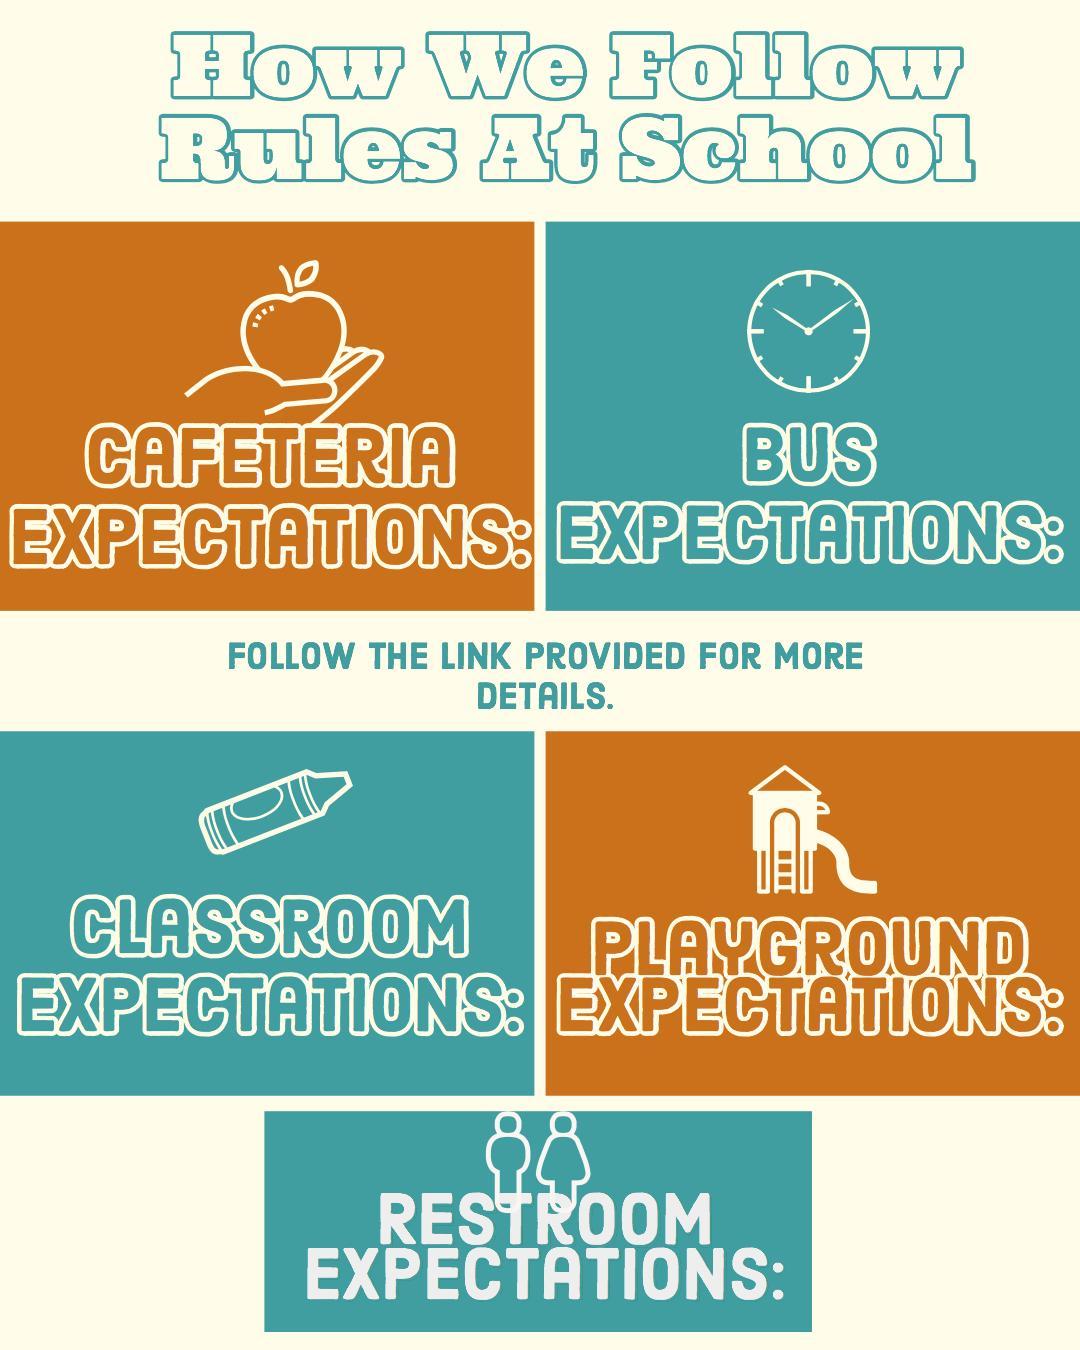 School Rules & Expectations